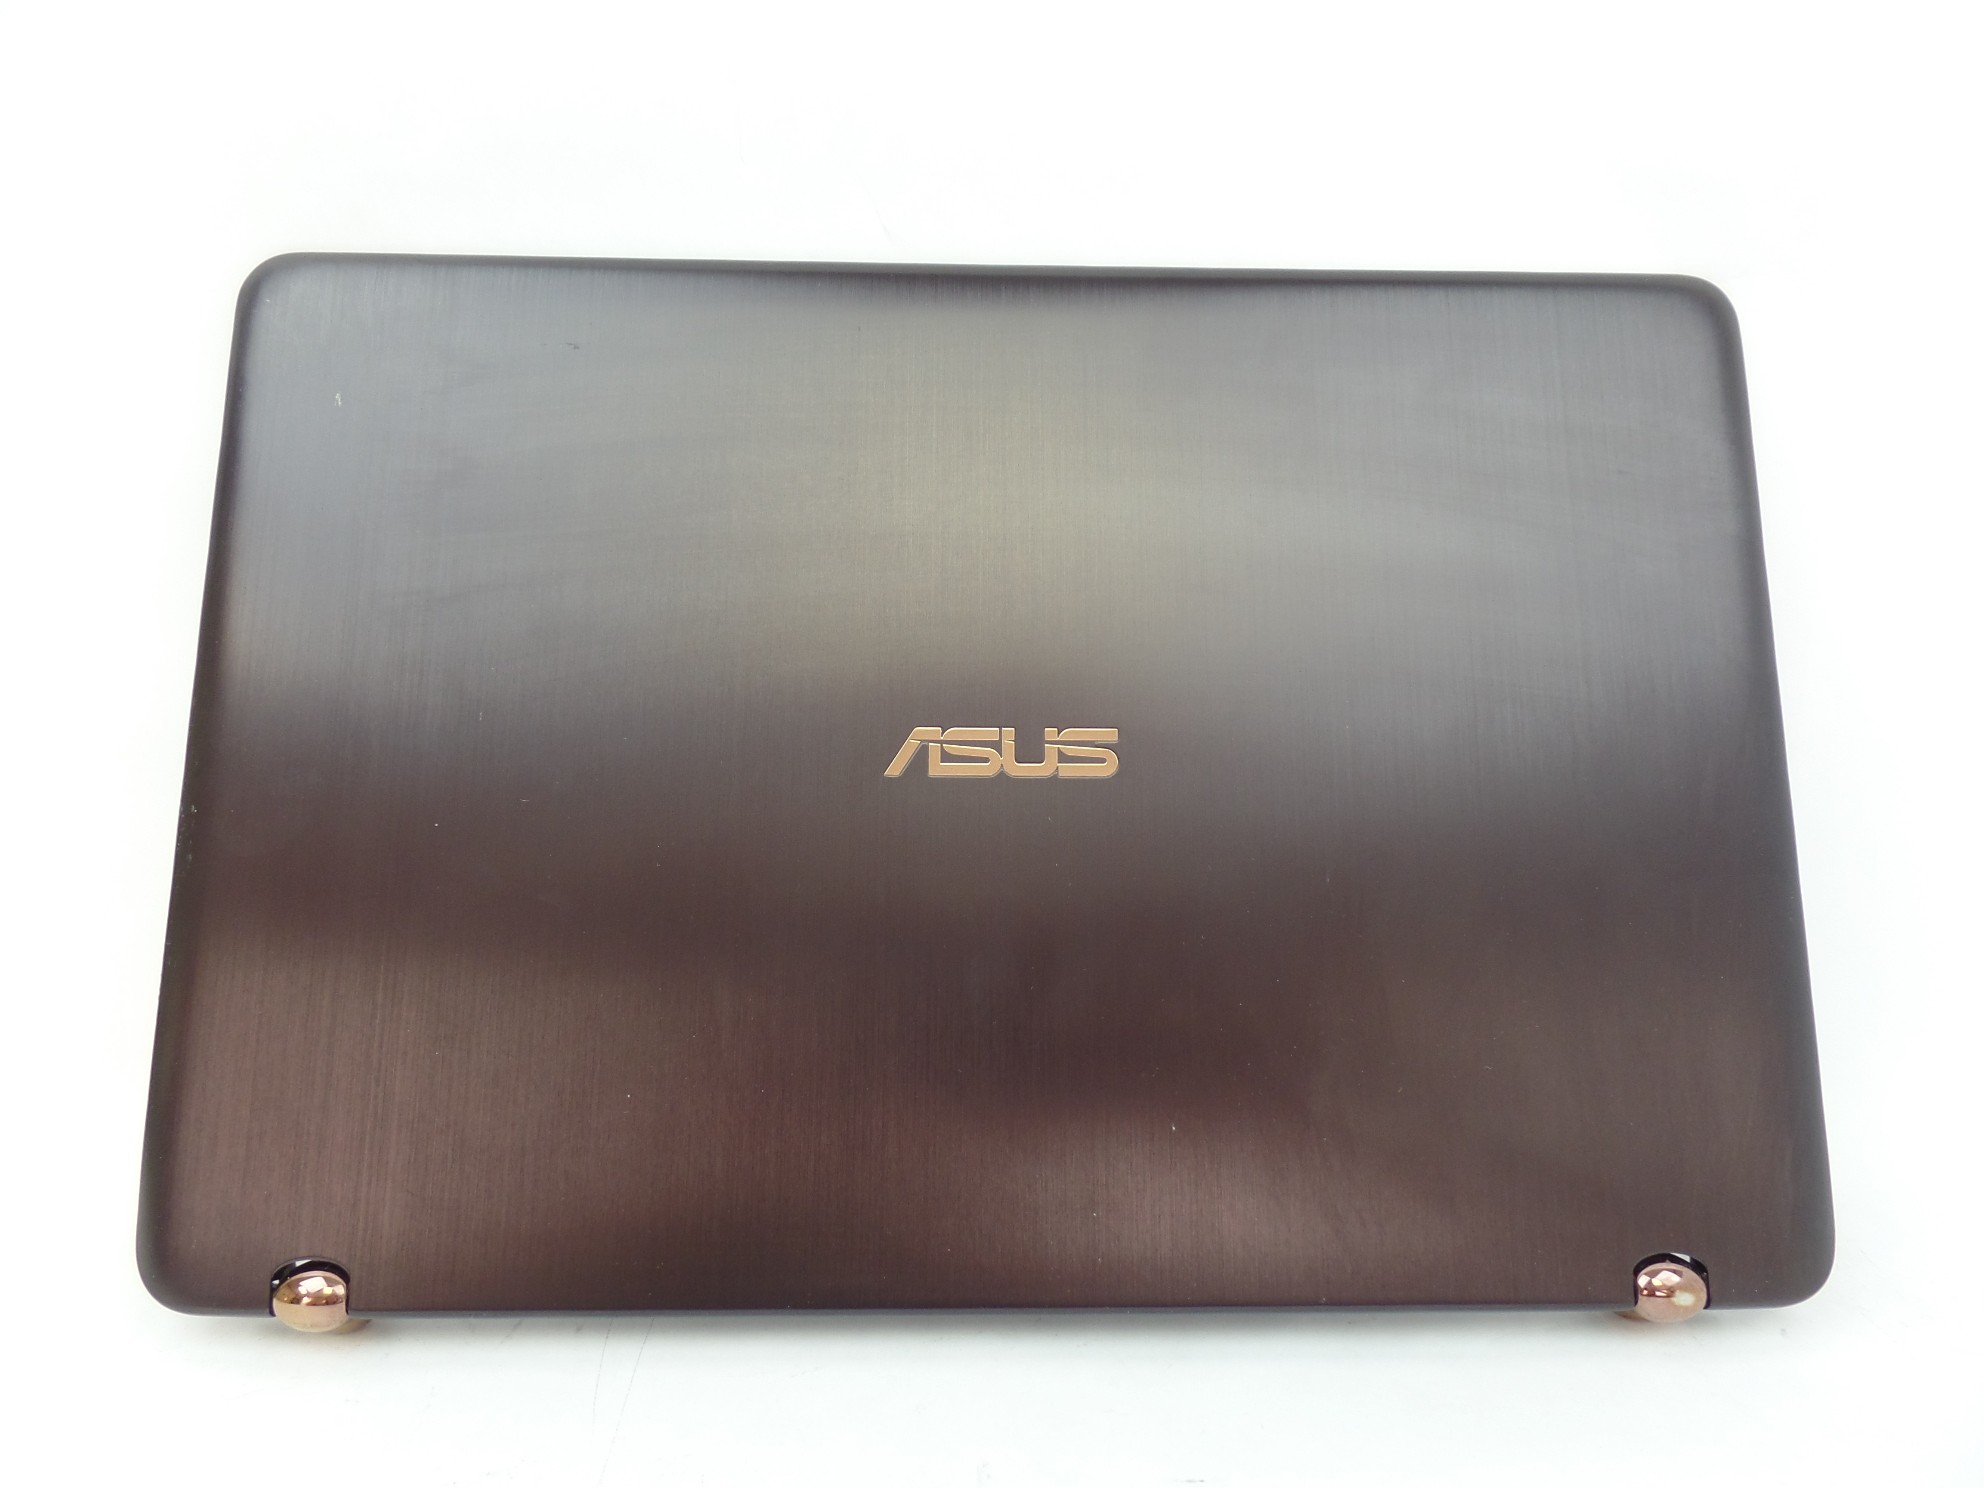 LCD back cover with hinges for Asus Q534UX Q534U 13NB0CE1AM0141 13NB0CE1P01311-1